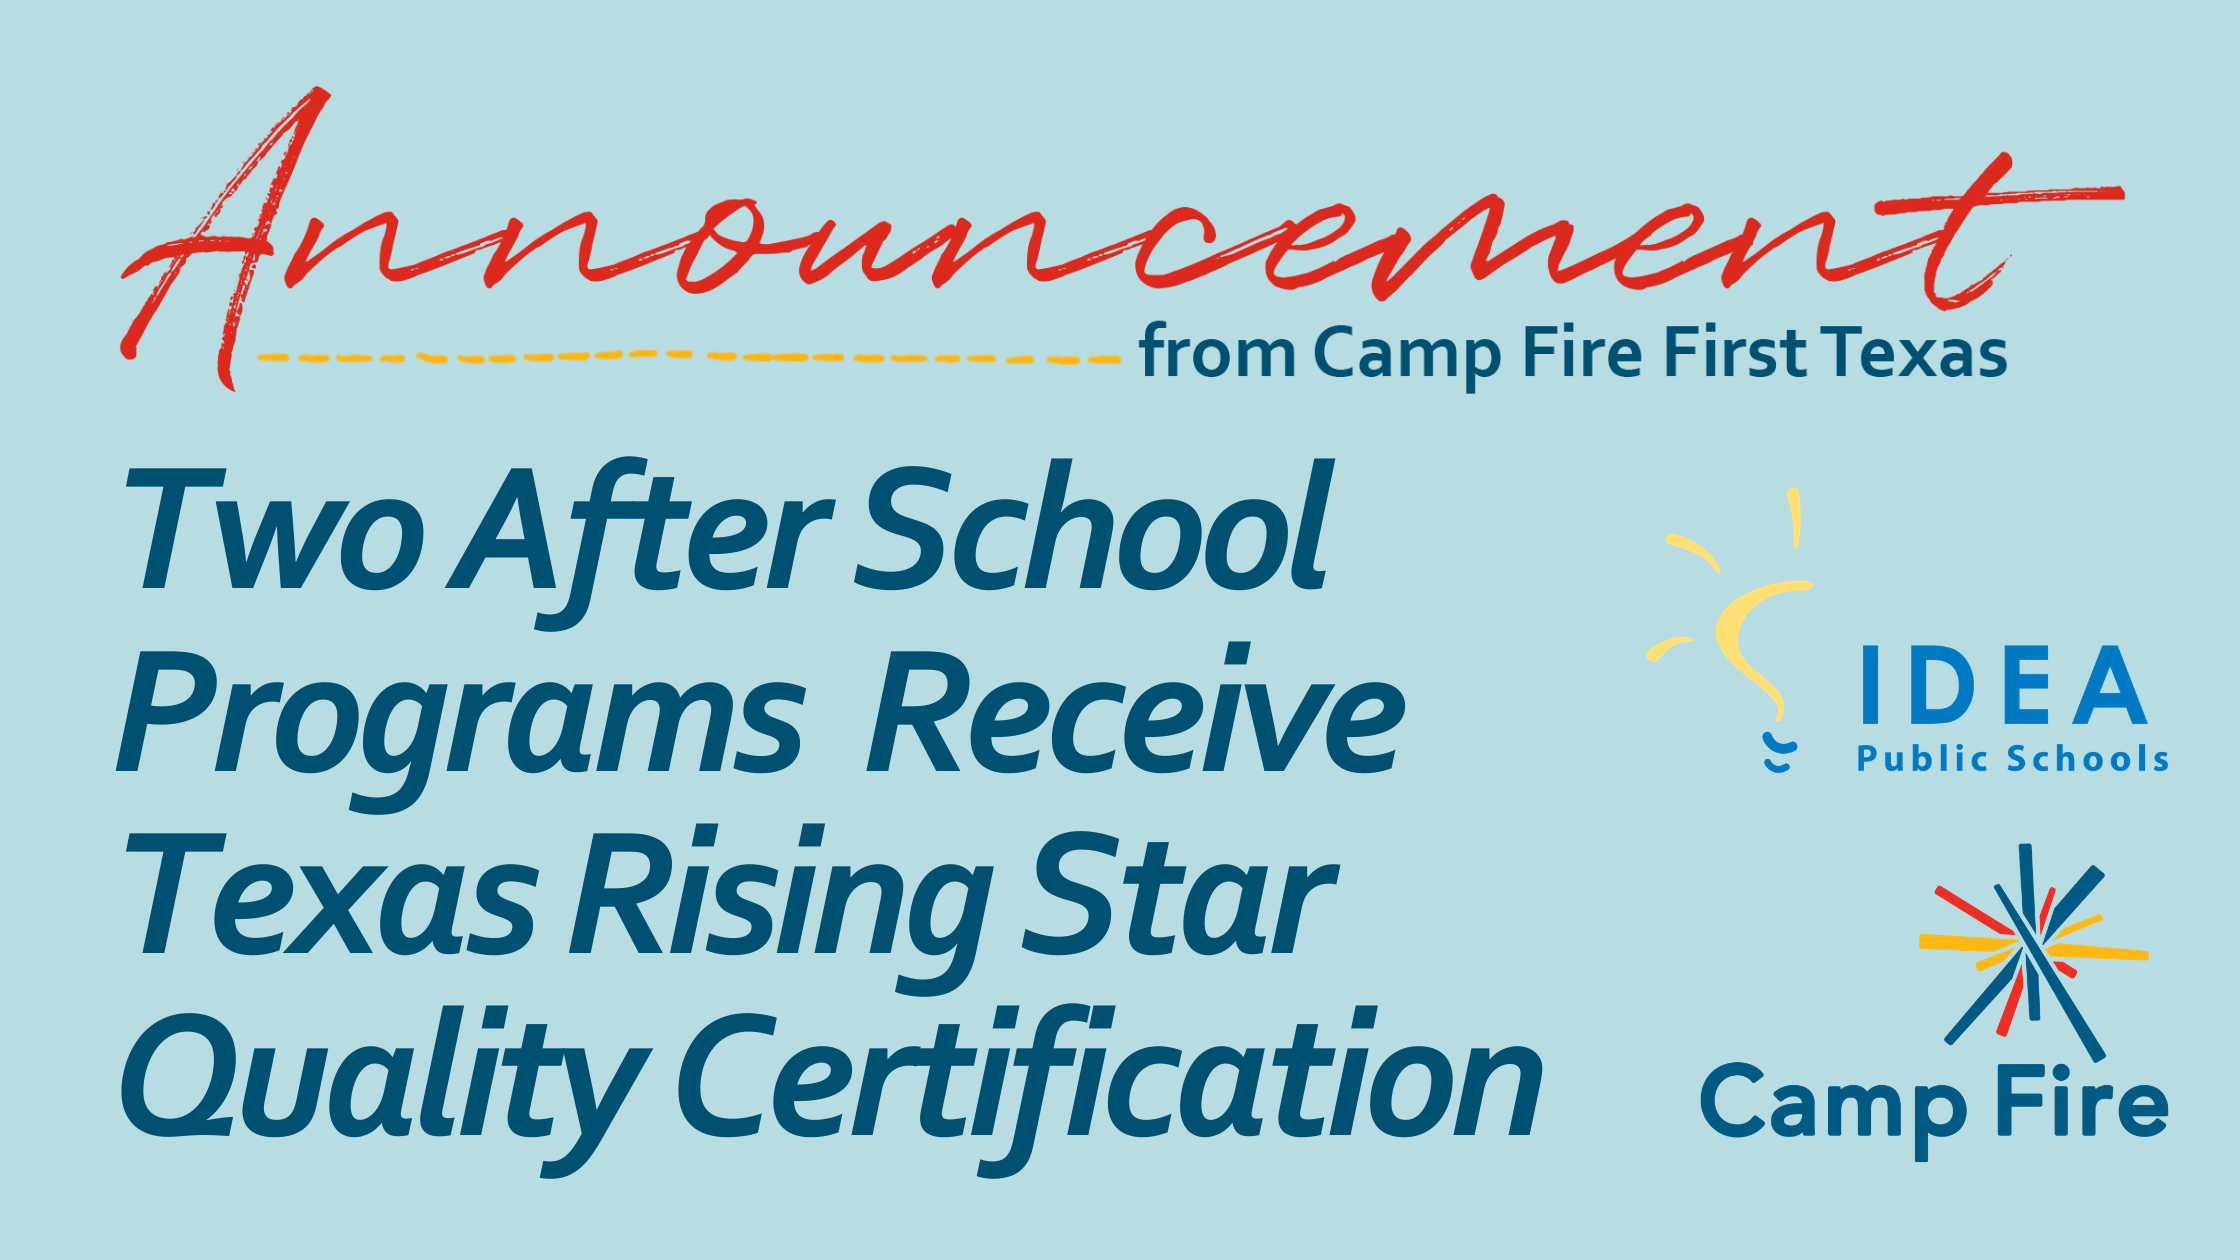 After School Programs Receive Texas Rising Star Quality Certification